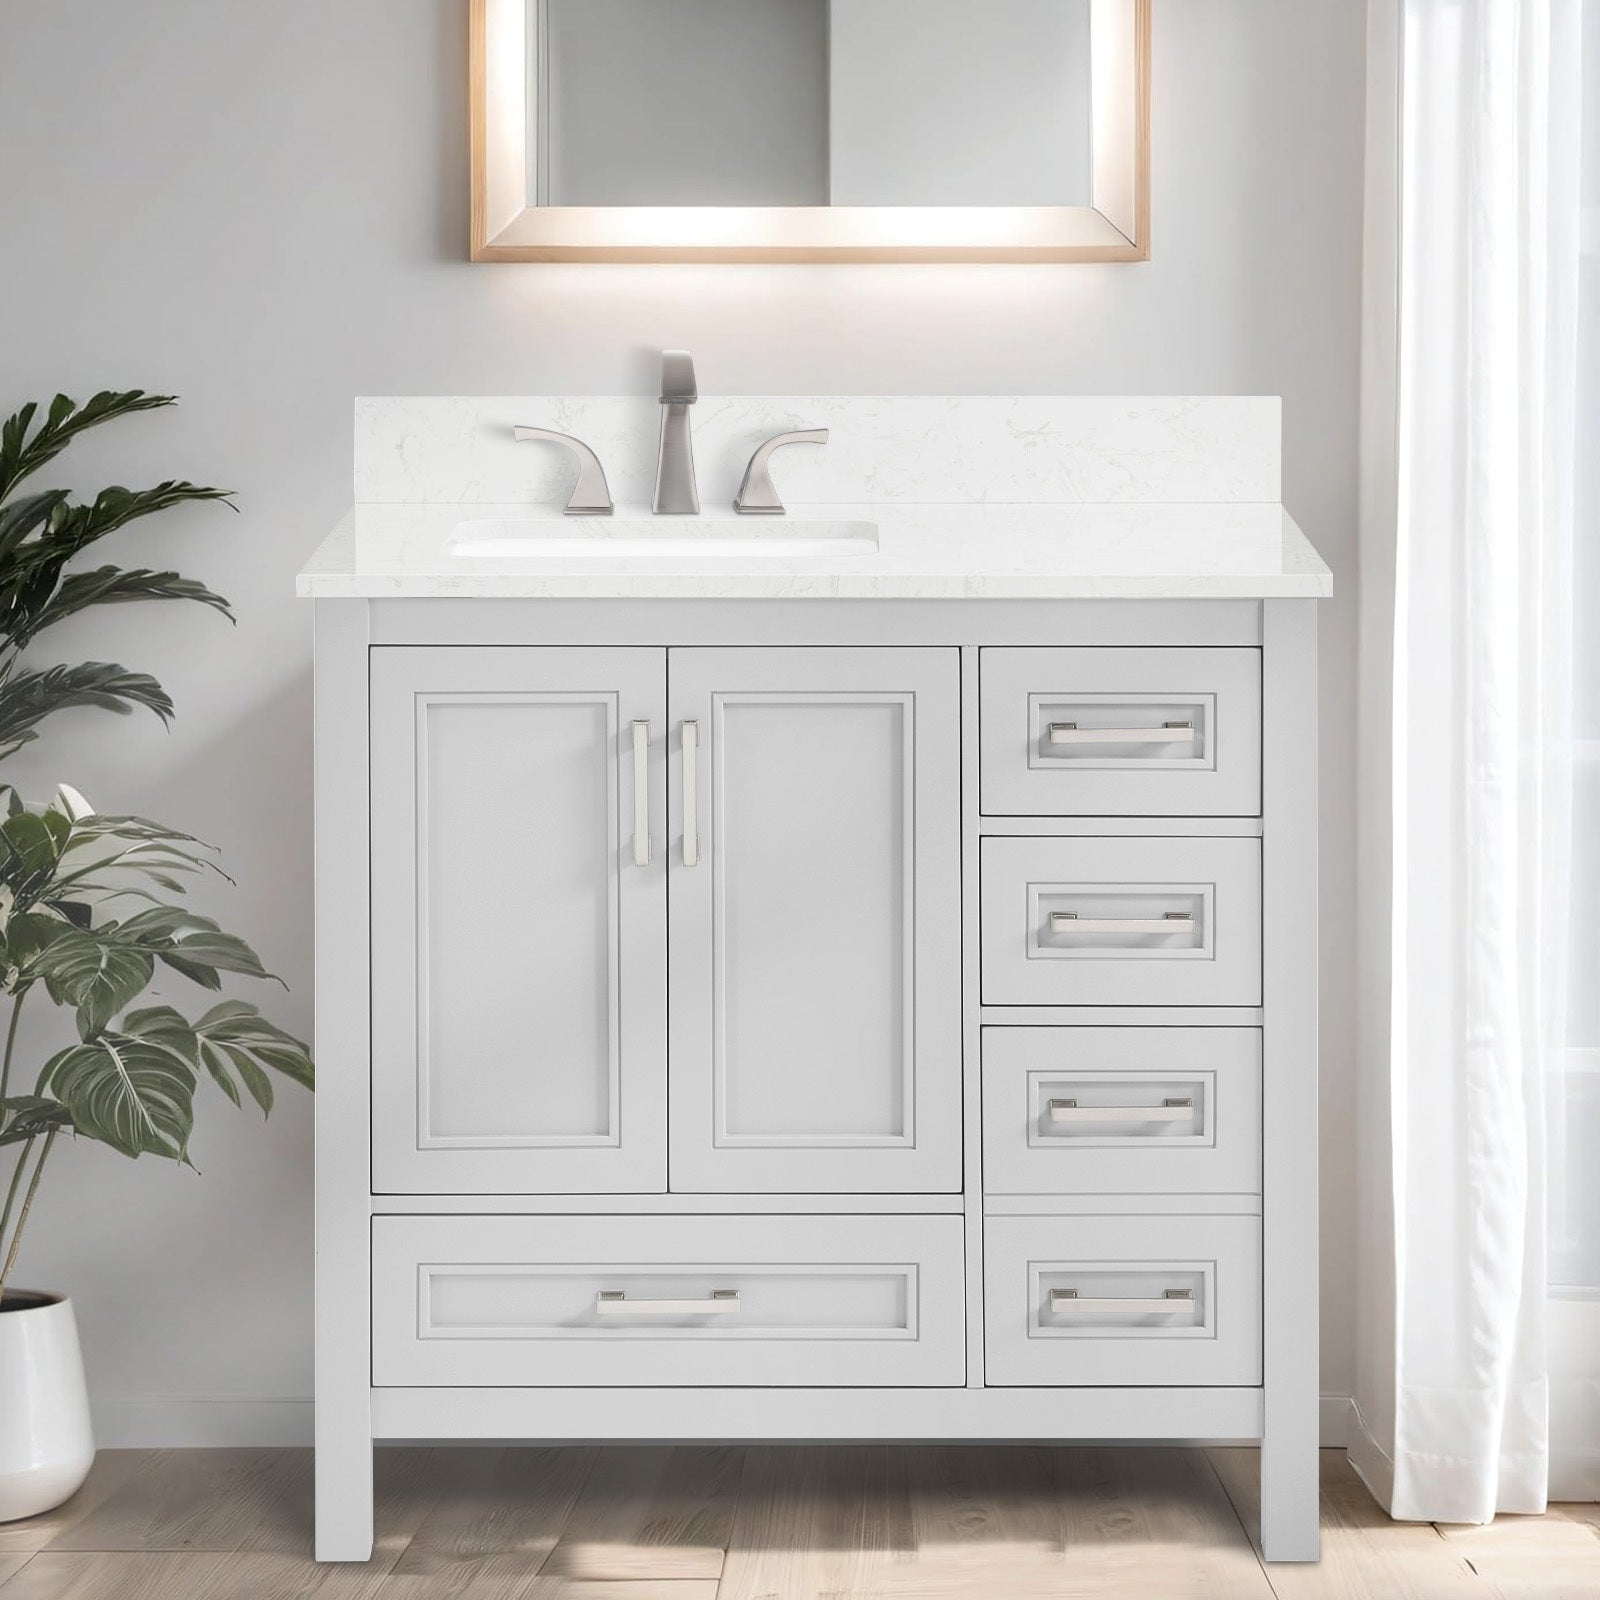 36 in Undermount Single Sink Bathroom Storage Cabinet light gray-2-4-36 to 47 in-36 to 59 in-soft close